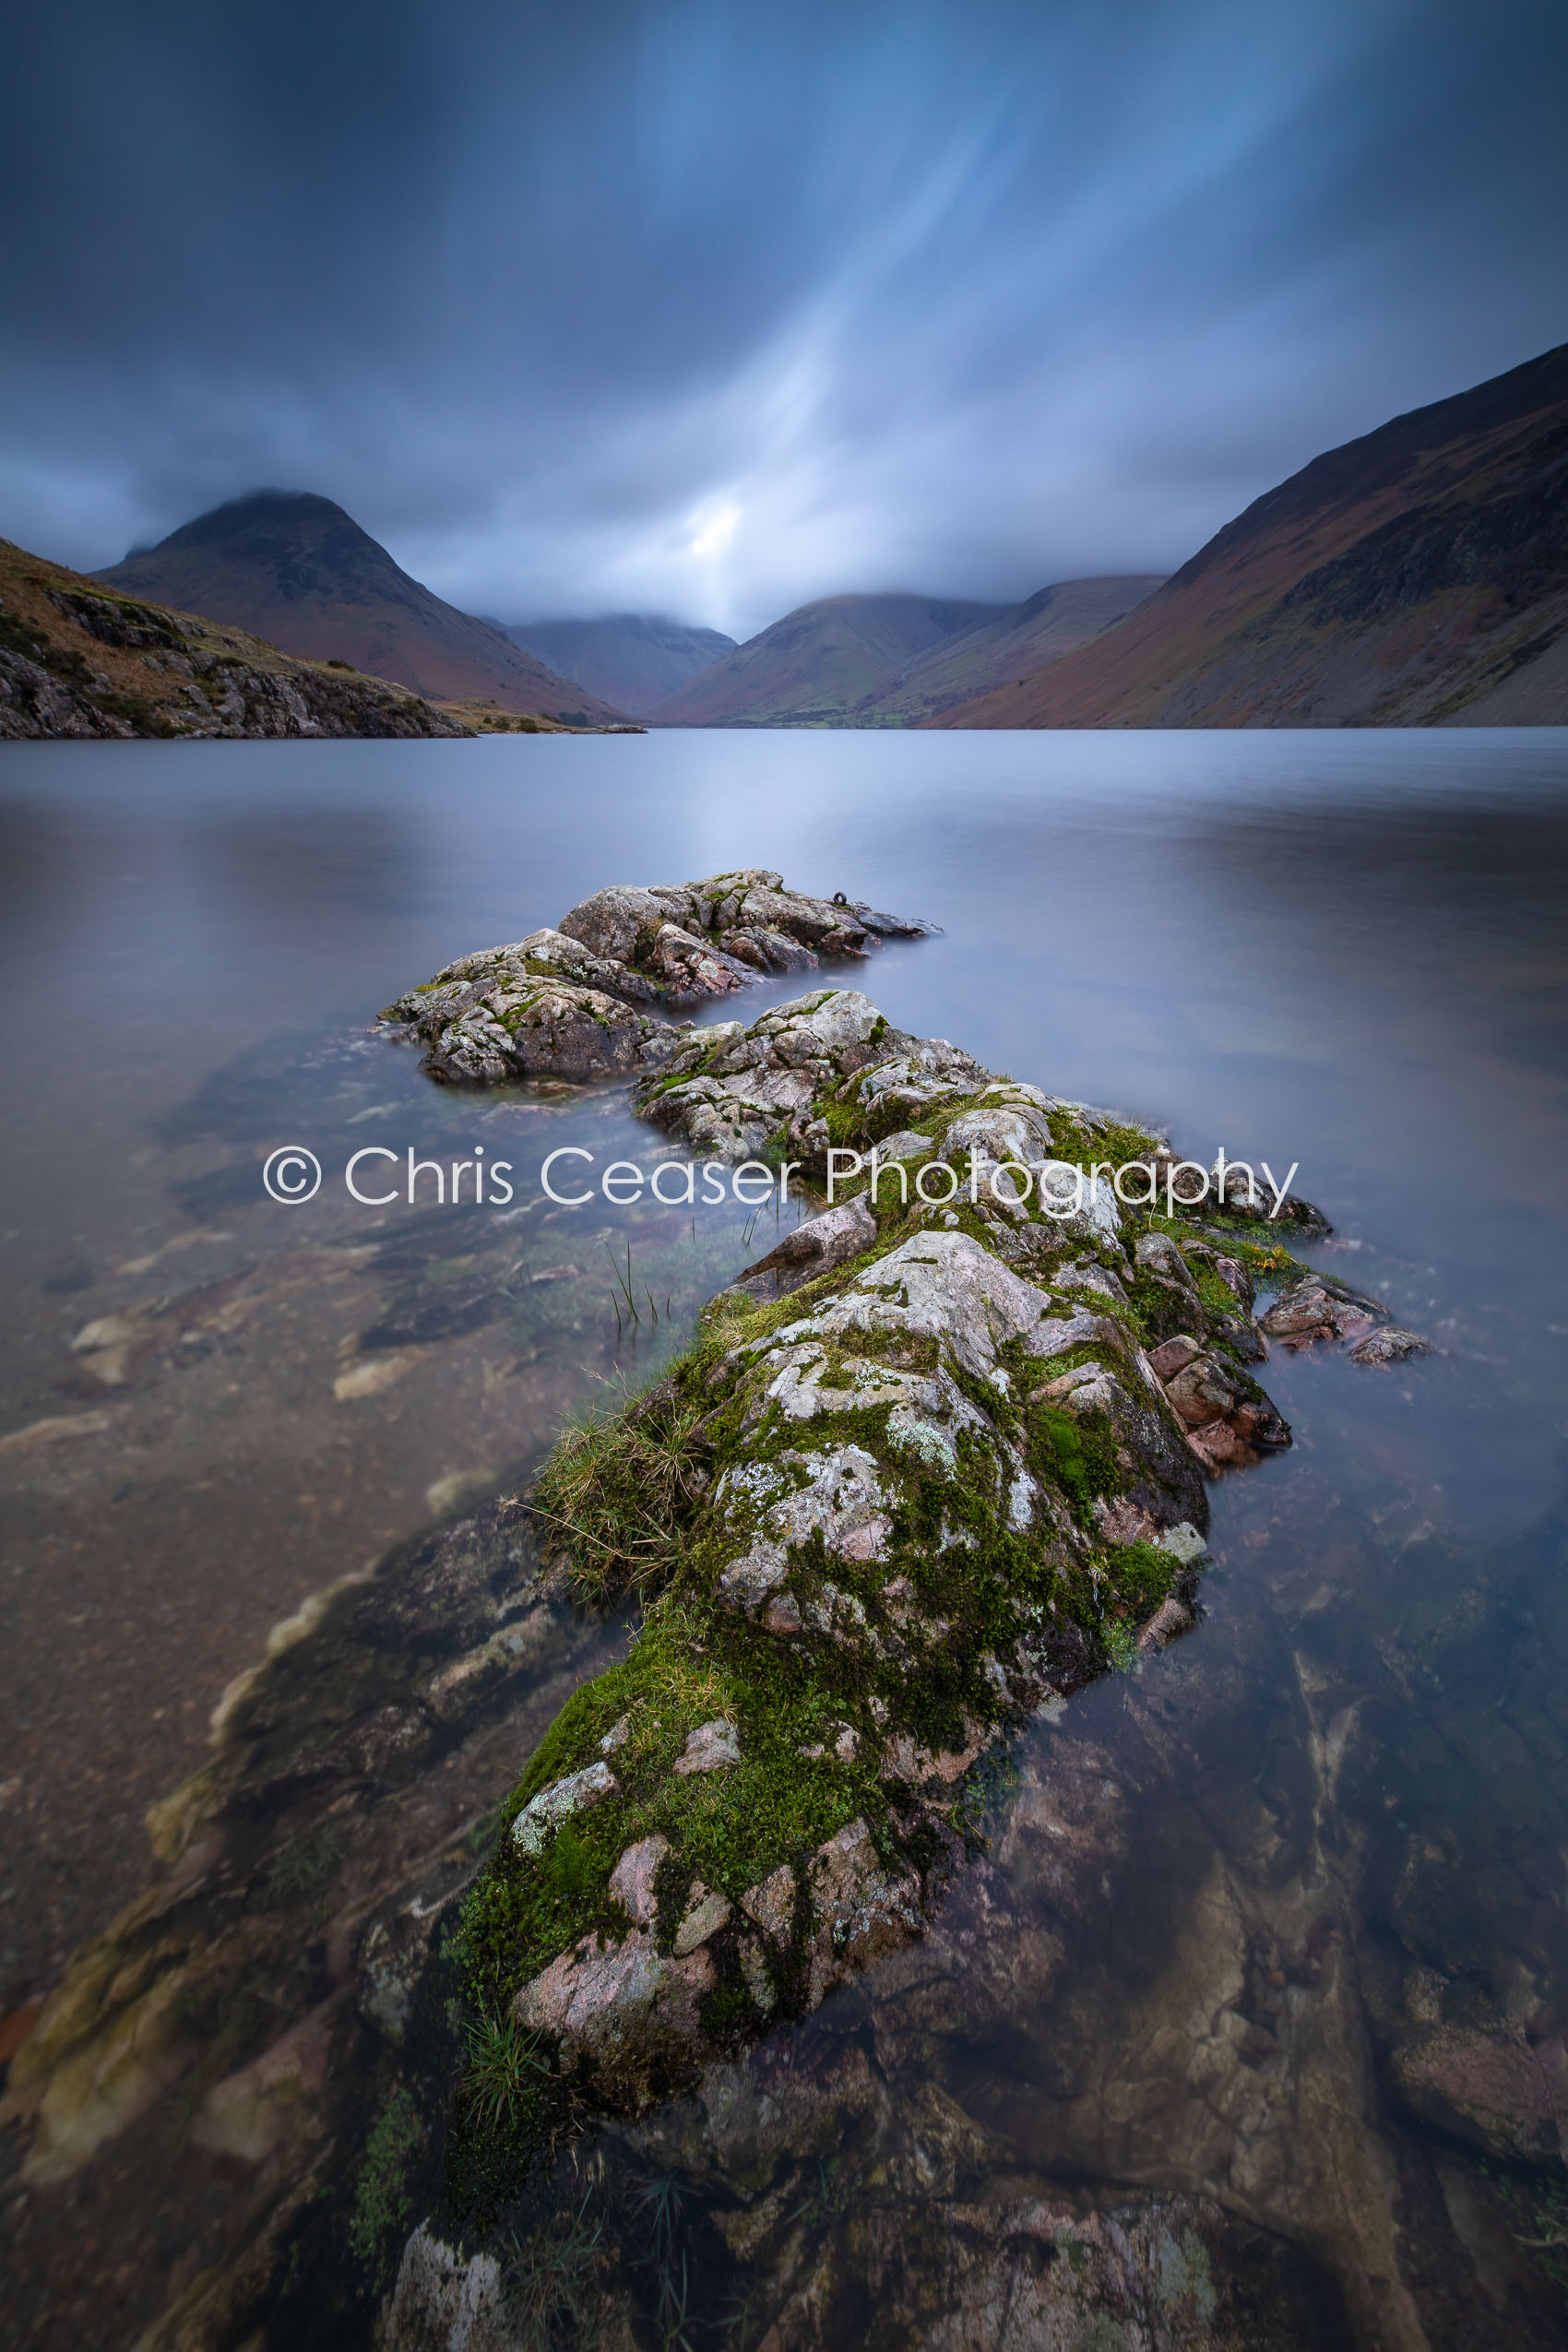 Submerged, Wast Water